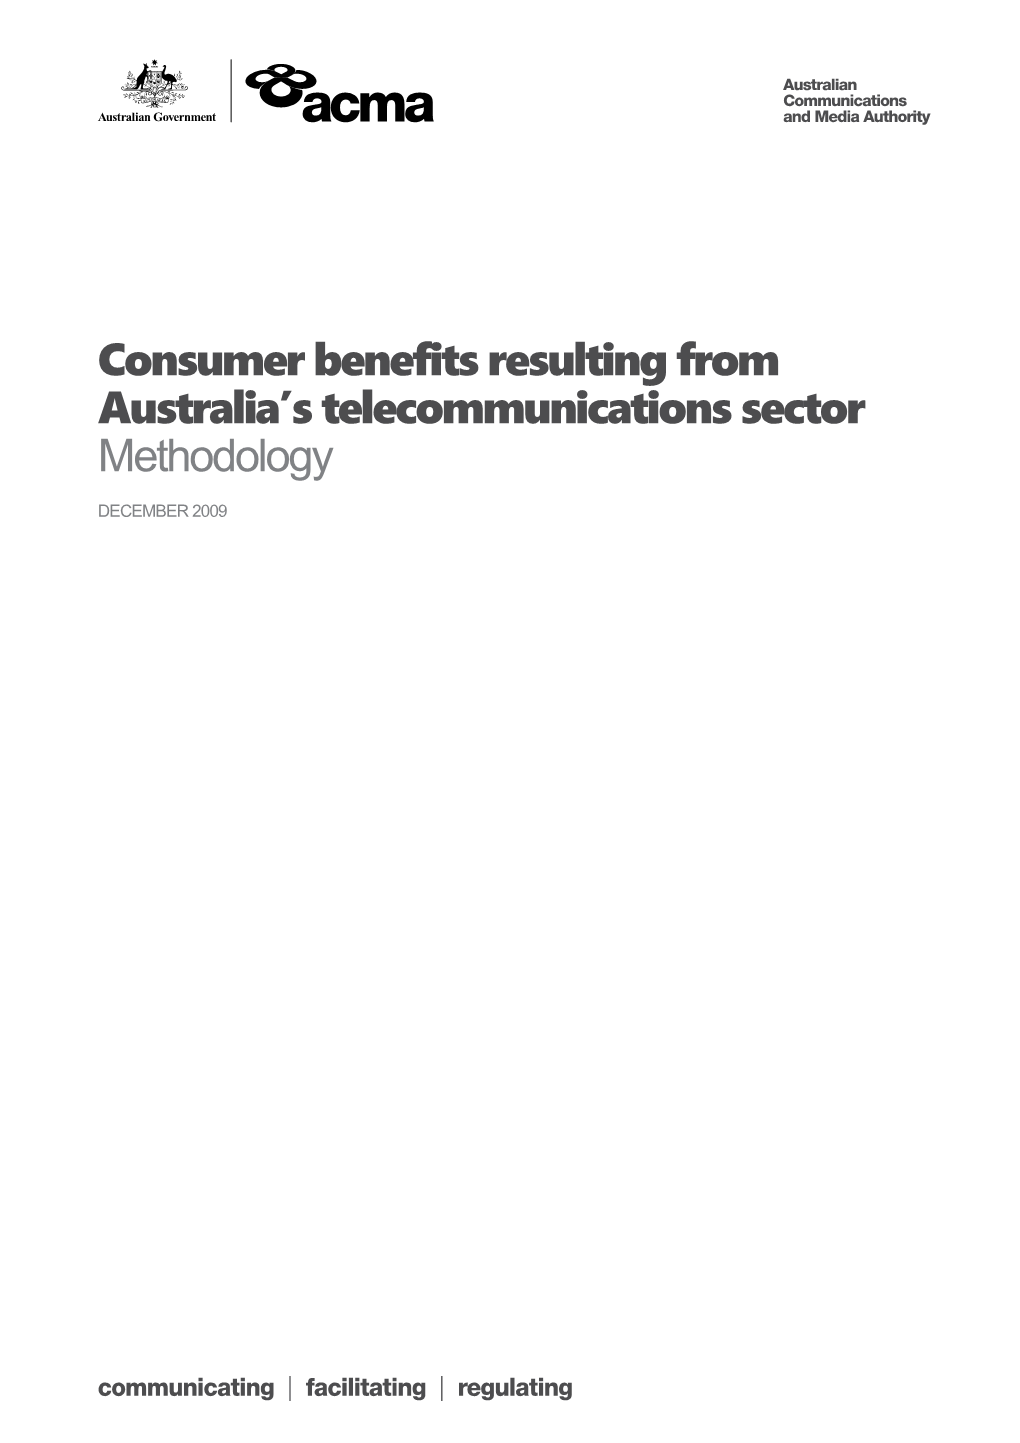 Consumer Benefits Resulting from Australia's Telecommunications Sector - Methodology